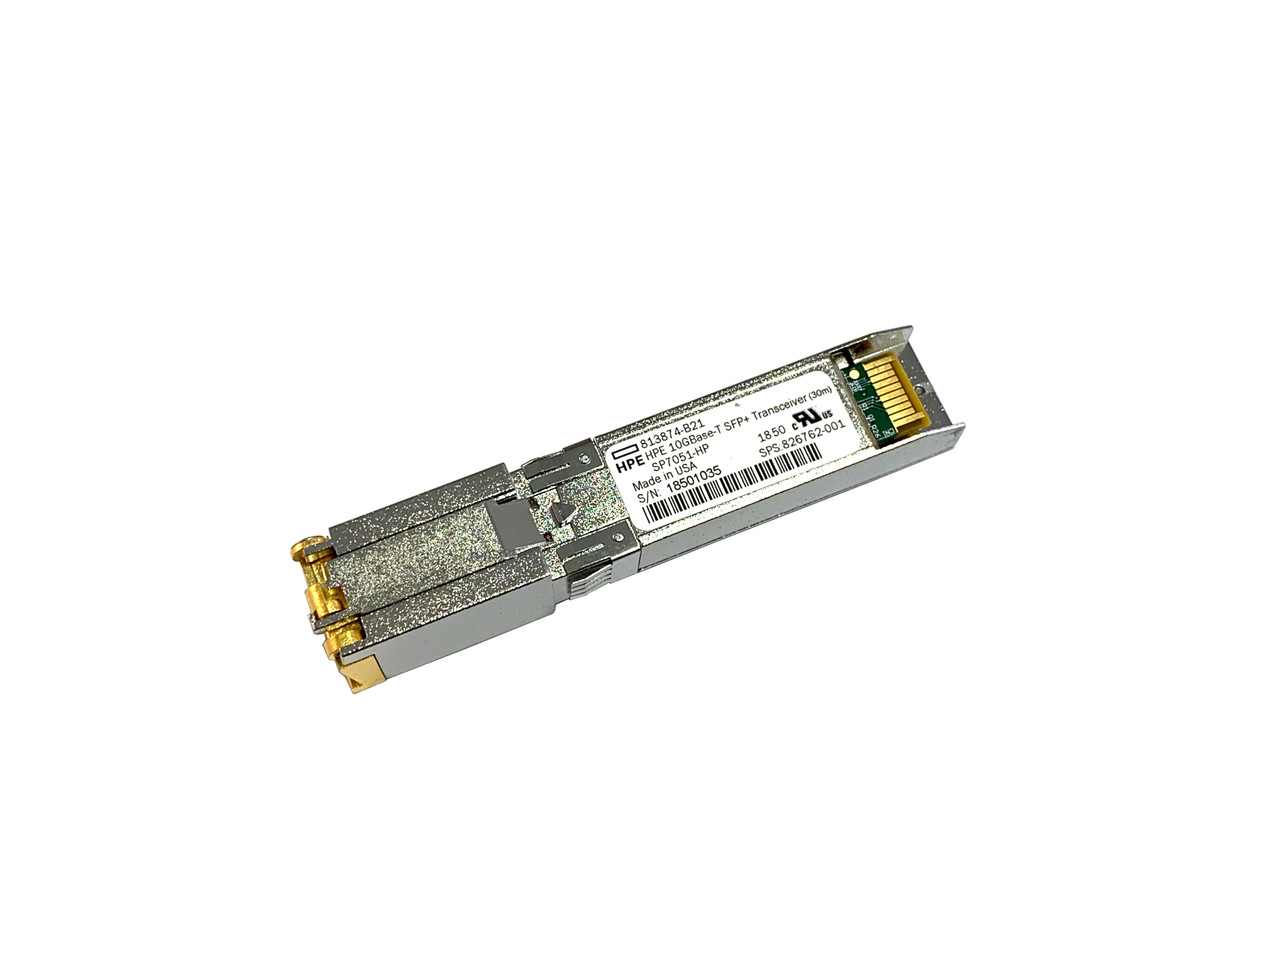 Hpe B21 10gbase T Sfp Transceiver